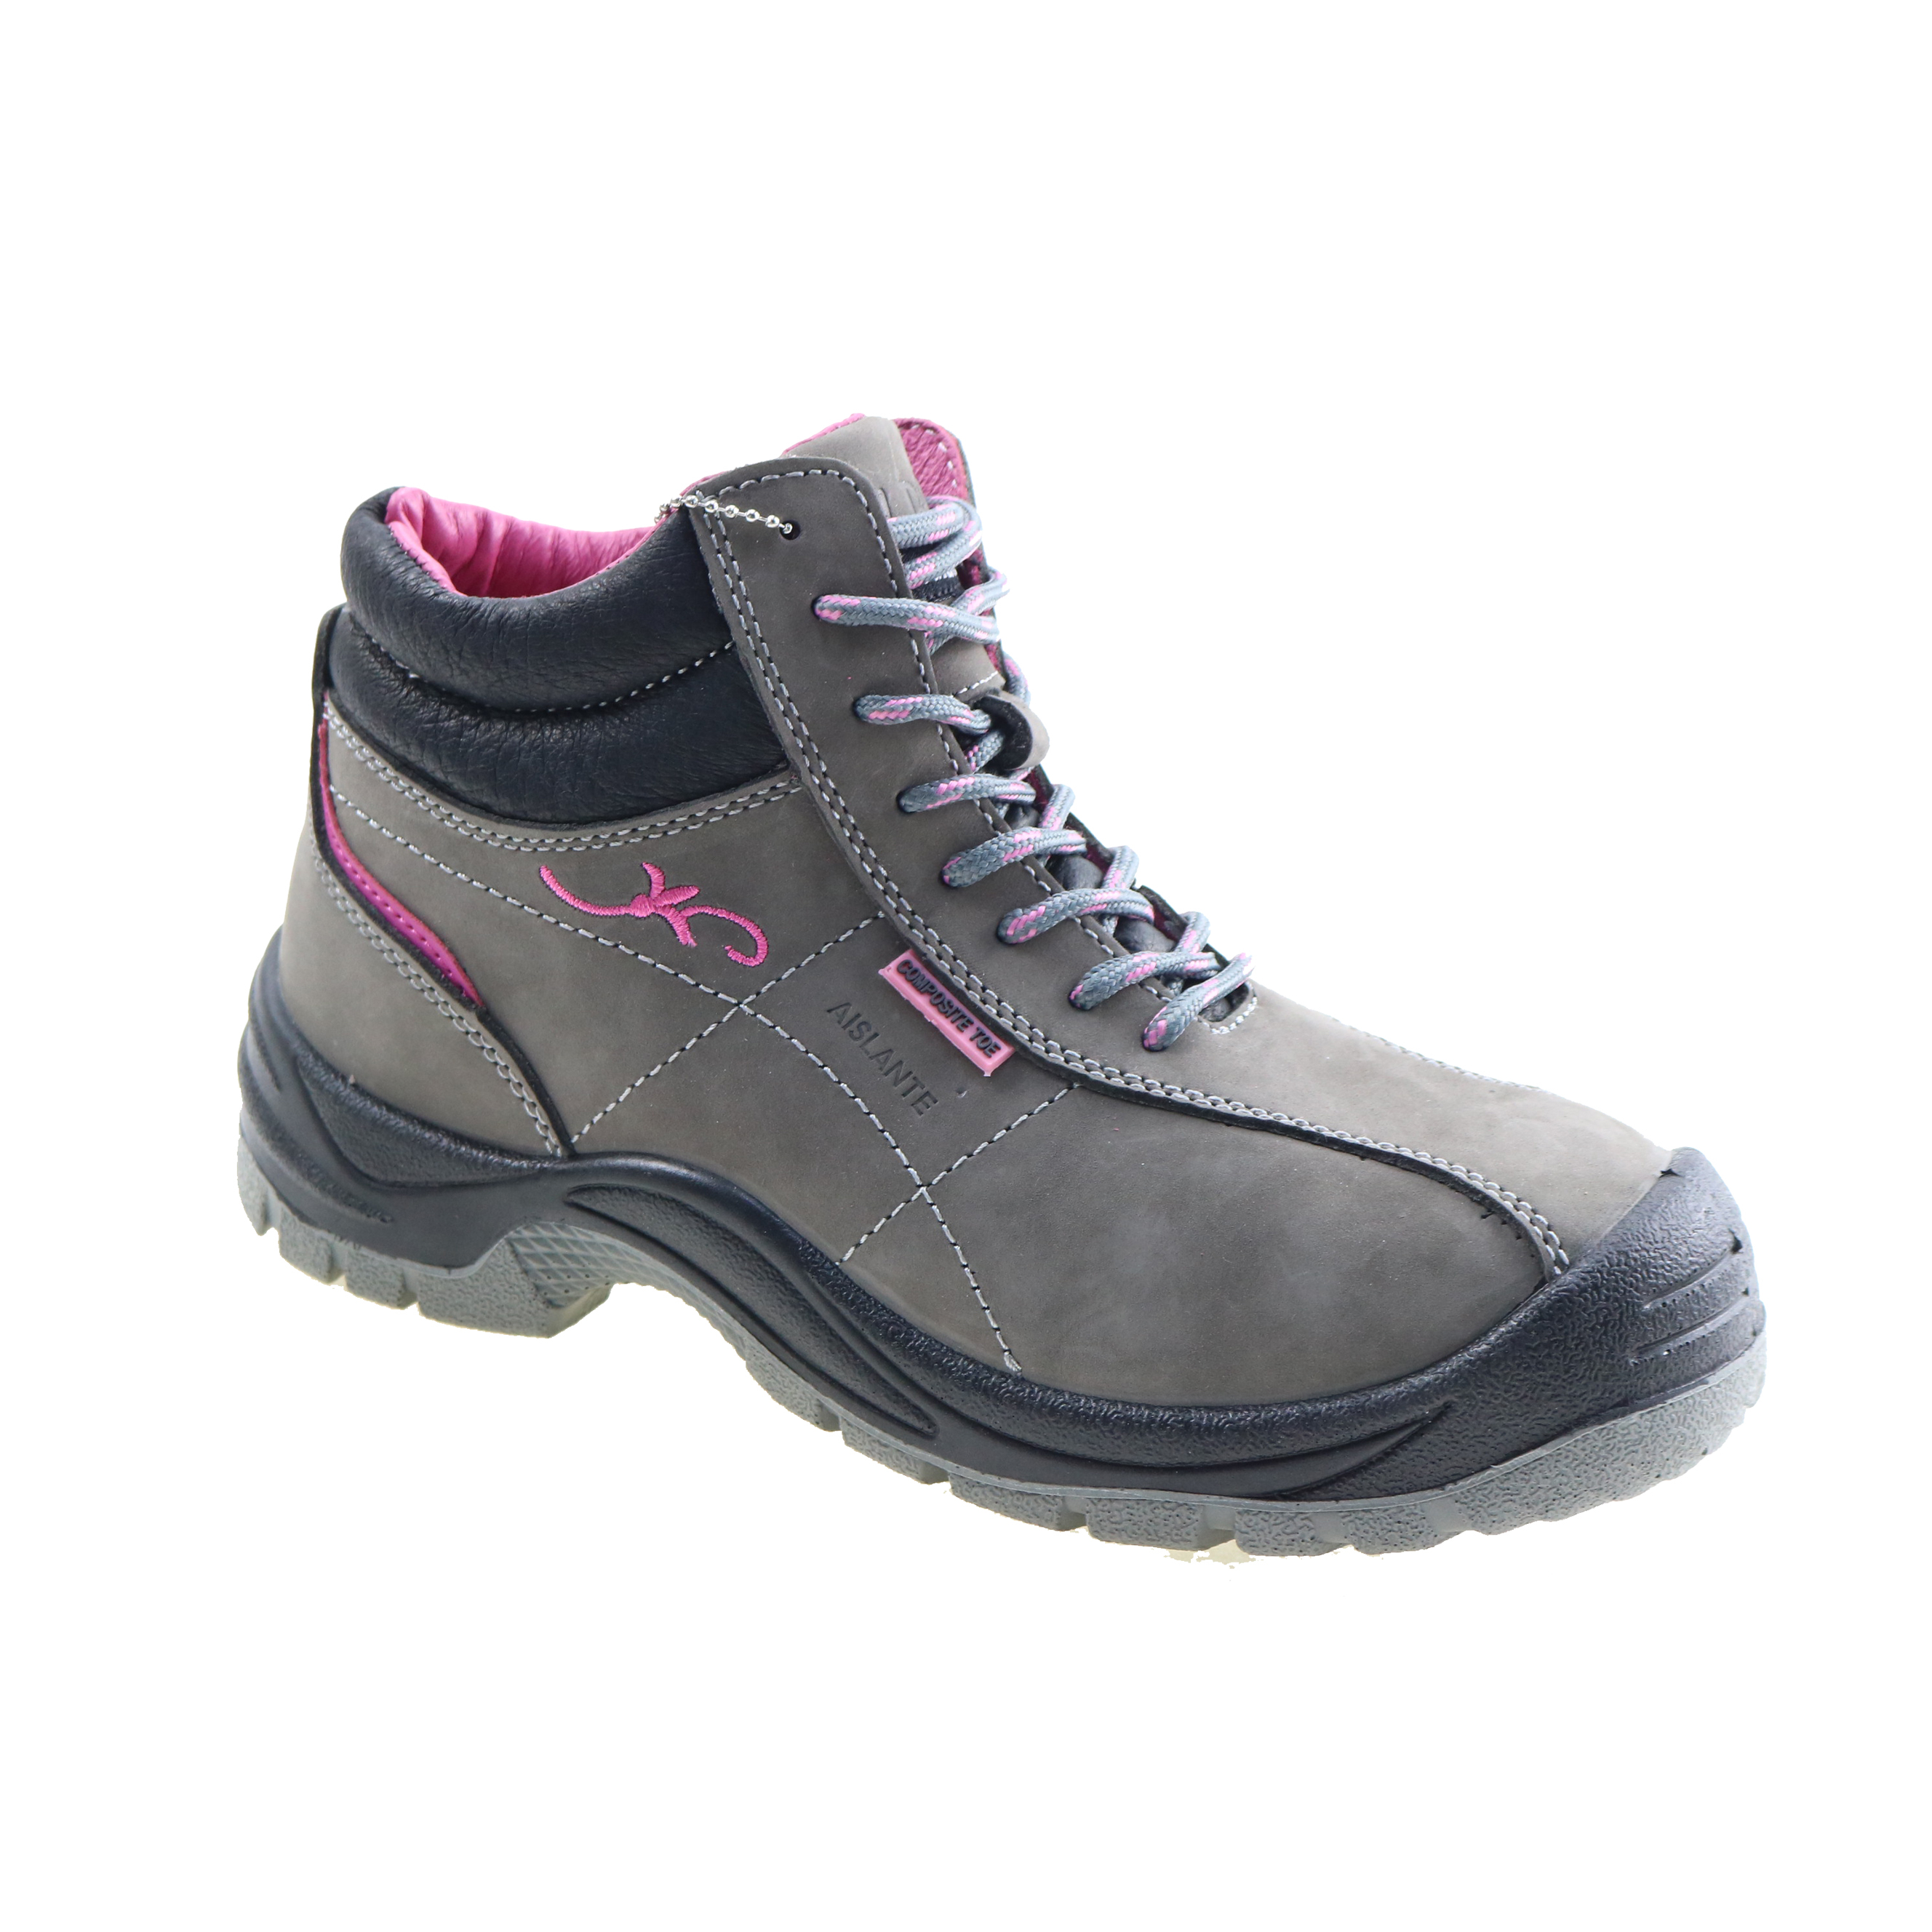 Light Weight Safety Shoes With Steel Toe Dual Density PU Injection Best Selling Safety Shoes